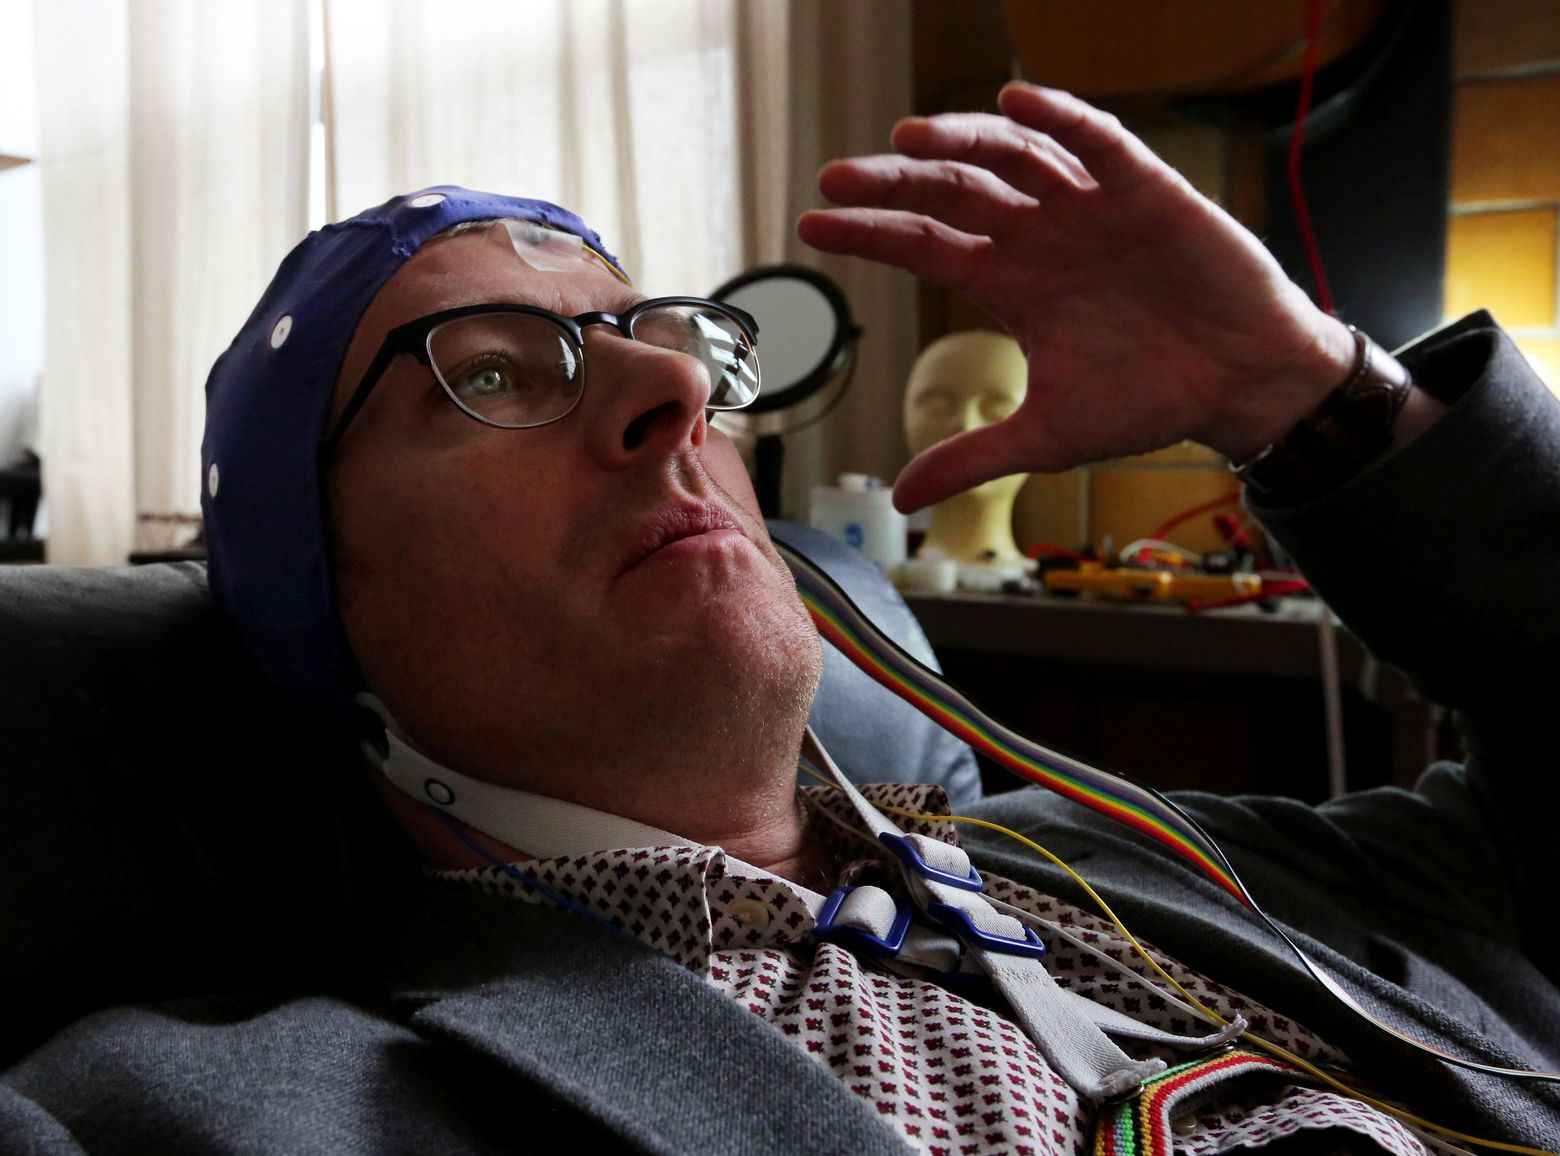 Meet the encephalophone: An instrument you can play with your mind, just by thinking